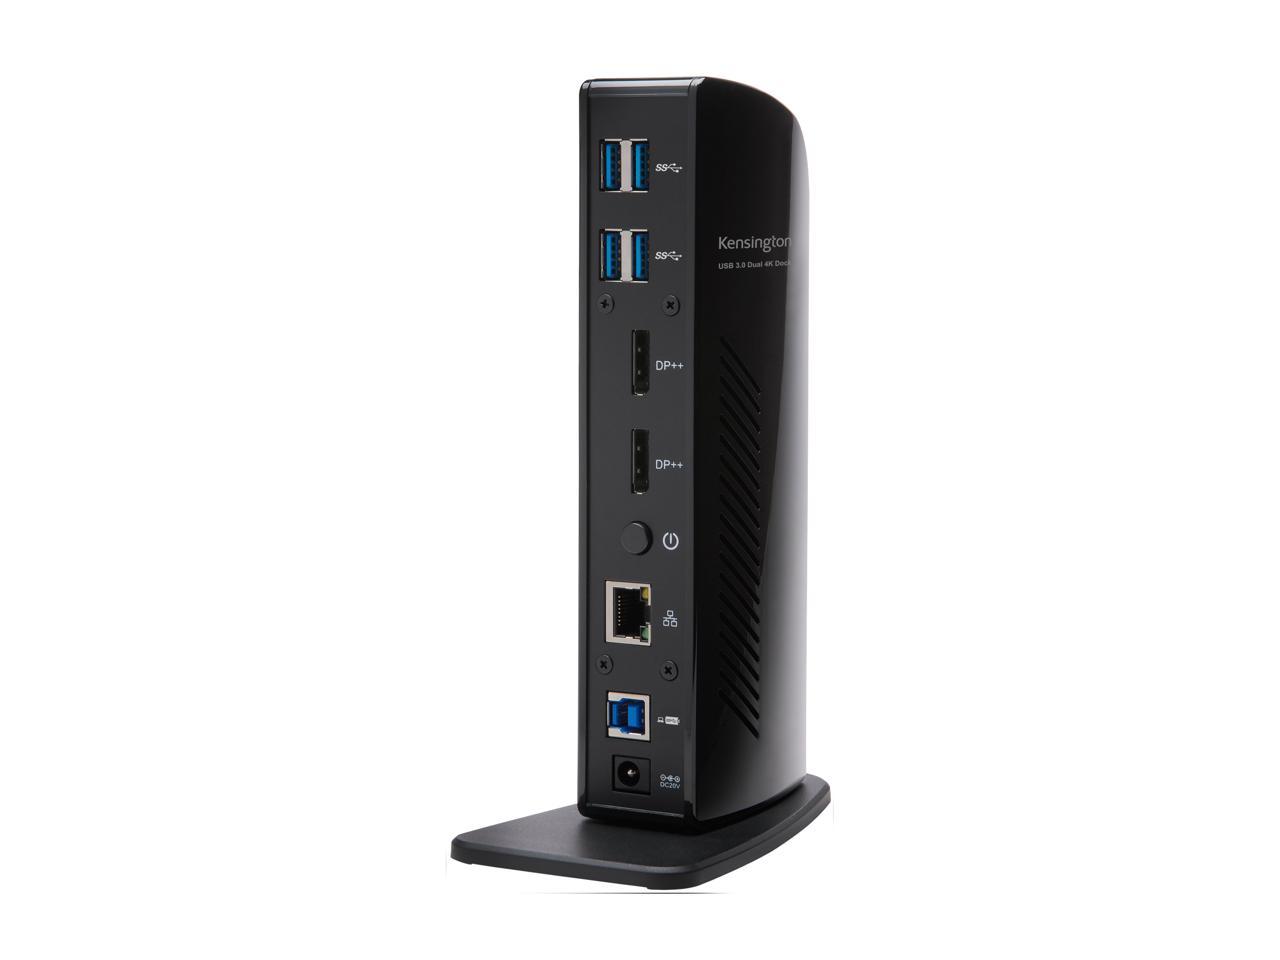 SD4100v 5Gbps USB 3.0 Dual 4K Docking Station - DP++/DP++ - Win/Mac/Chrome (3m Cable Included)